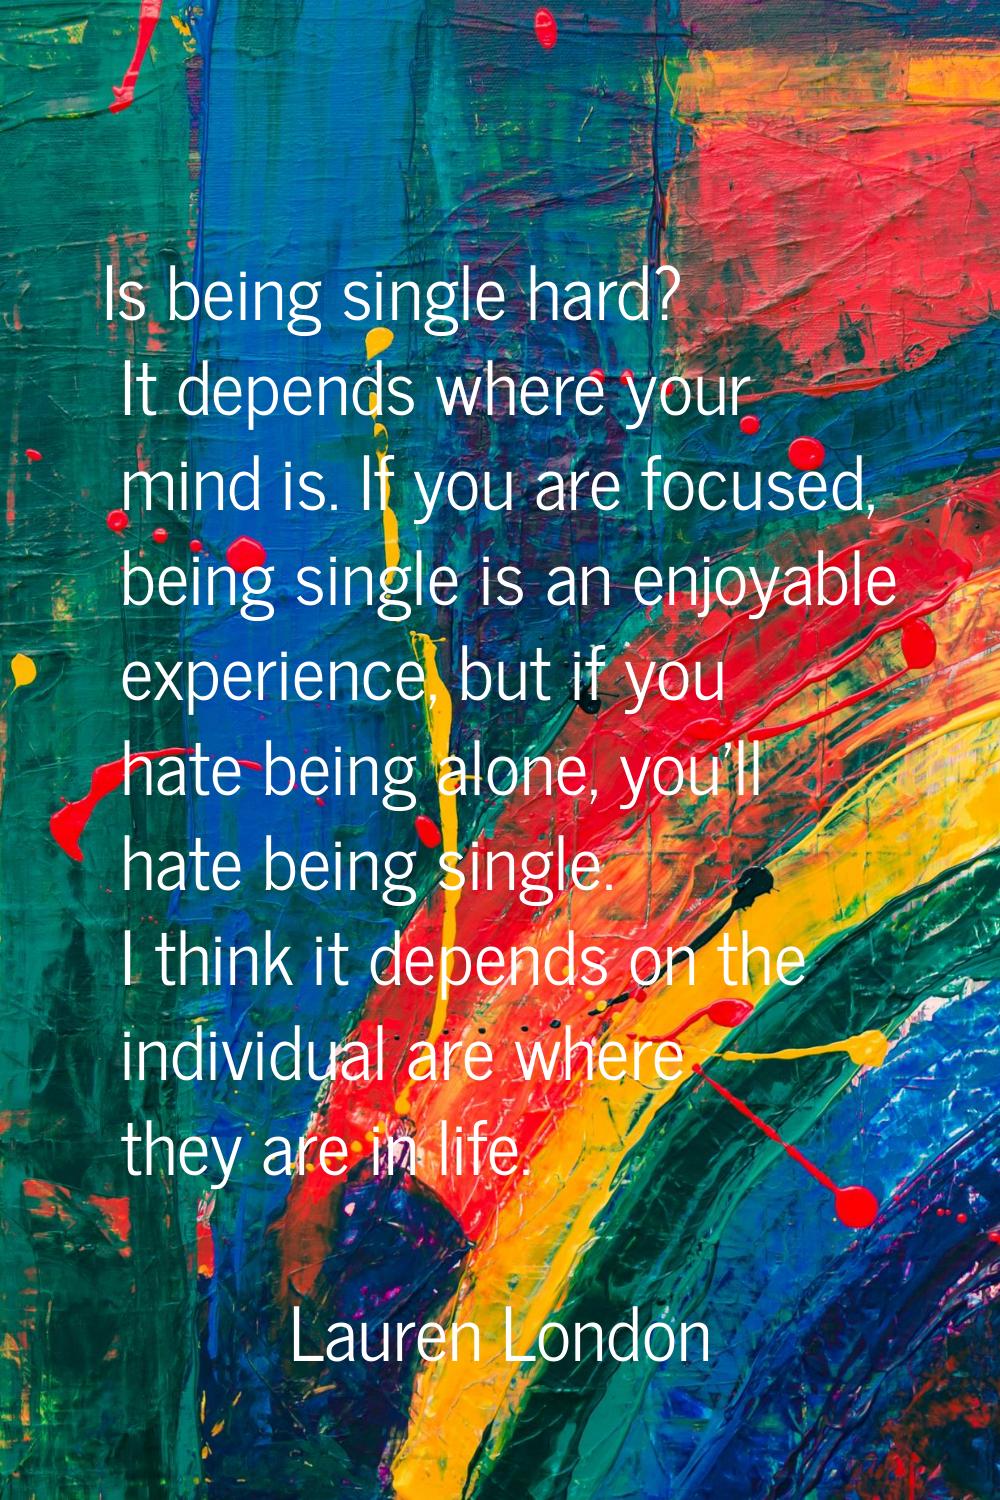 Is being single hard? It depends where your mind is. If you are focused, being single is an enjoyab